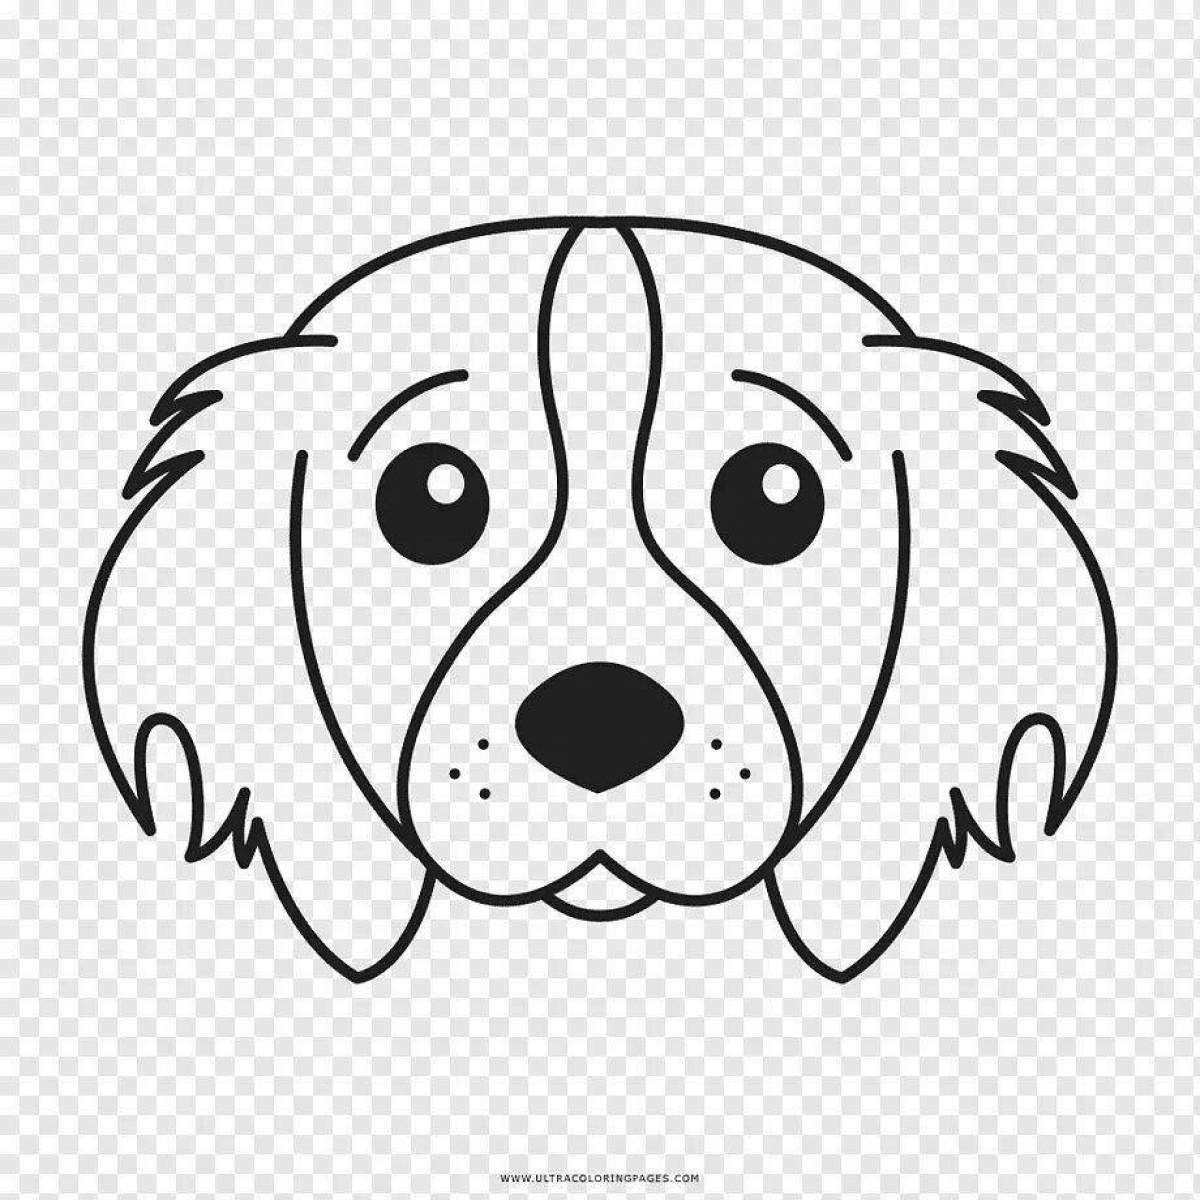 Coloring page funny dog ​​face